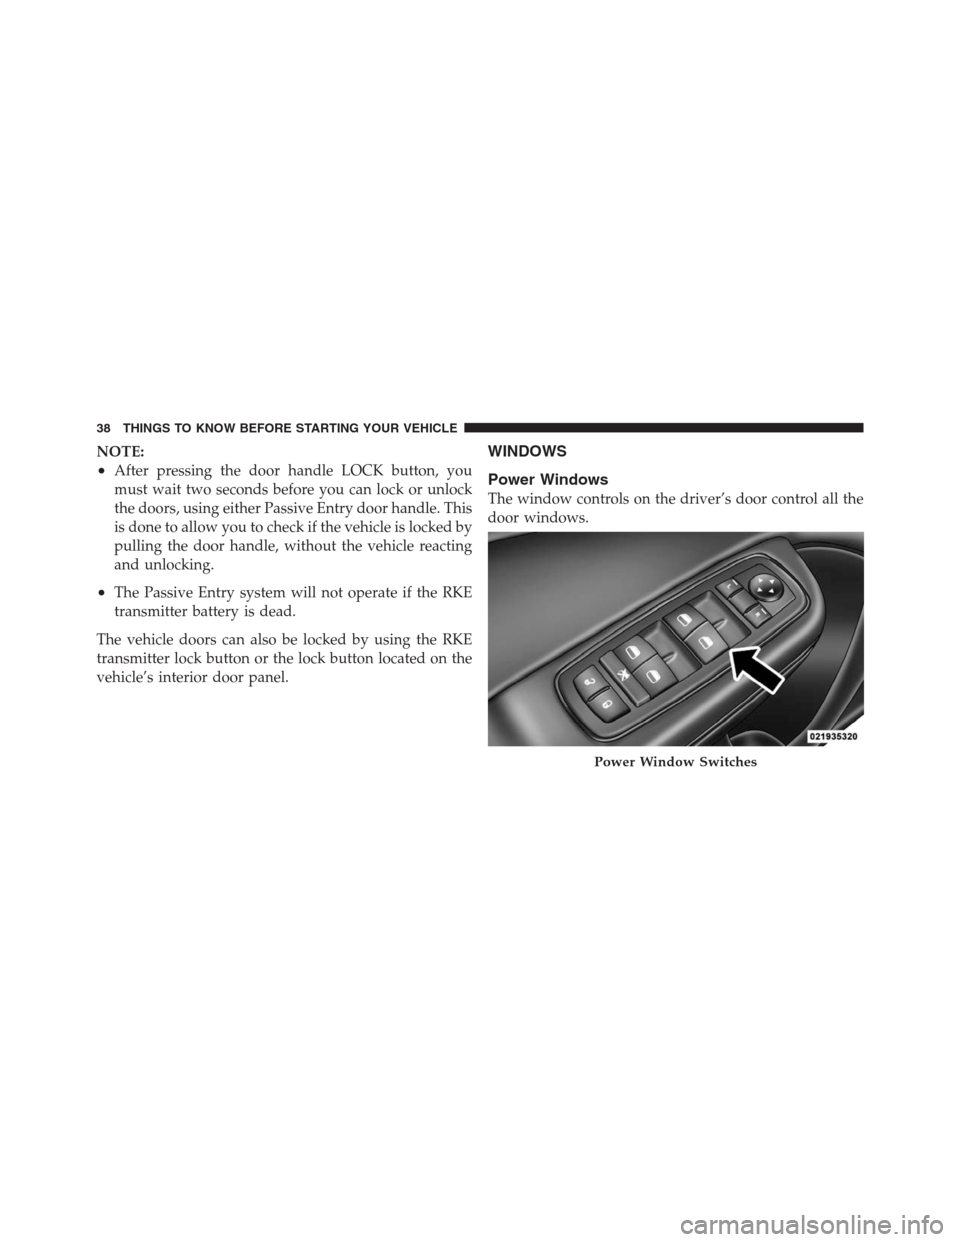 CHRYSLER 300 2012 2.G Owners Guide NOTE:
•After pressing the door handle LOCK button, you
must wait two seconds before you can lock or unlock
the doors, using either Passive Entry door handle. This
is done to allow you to check if th